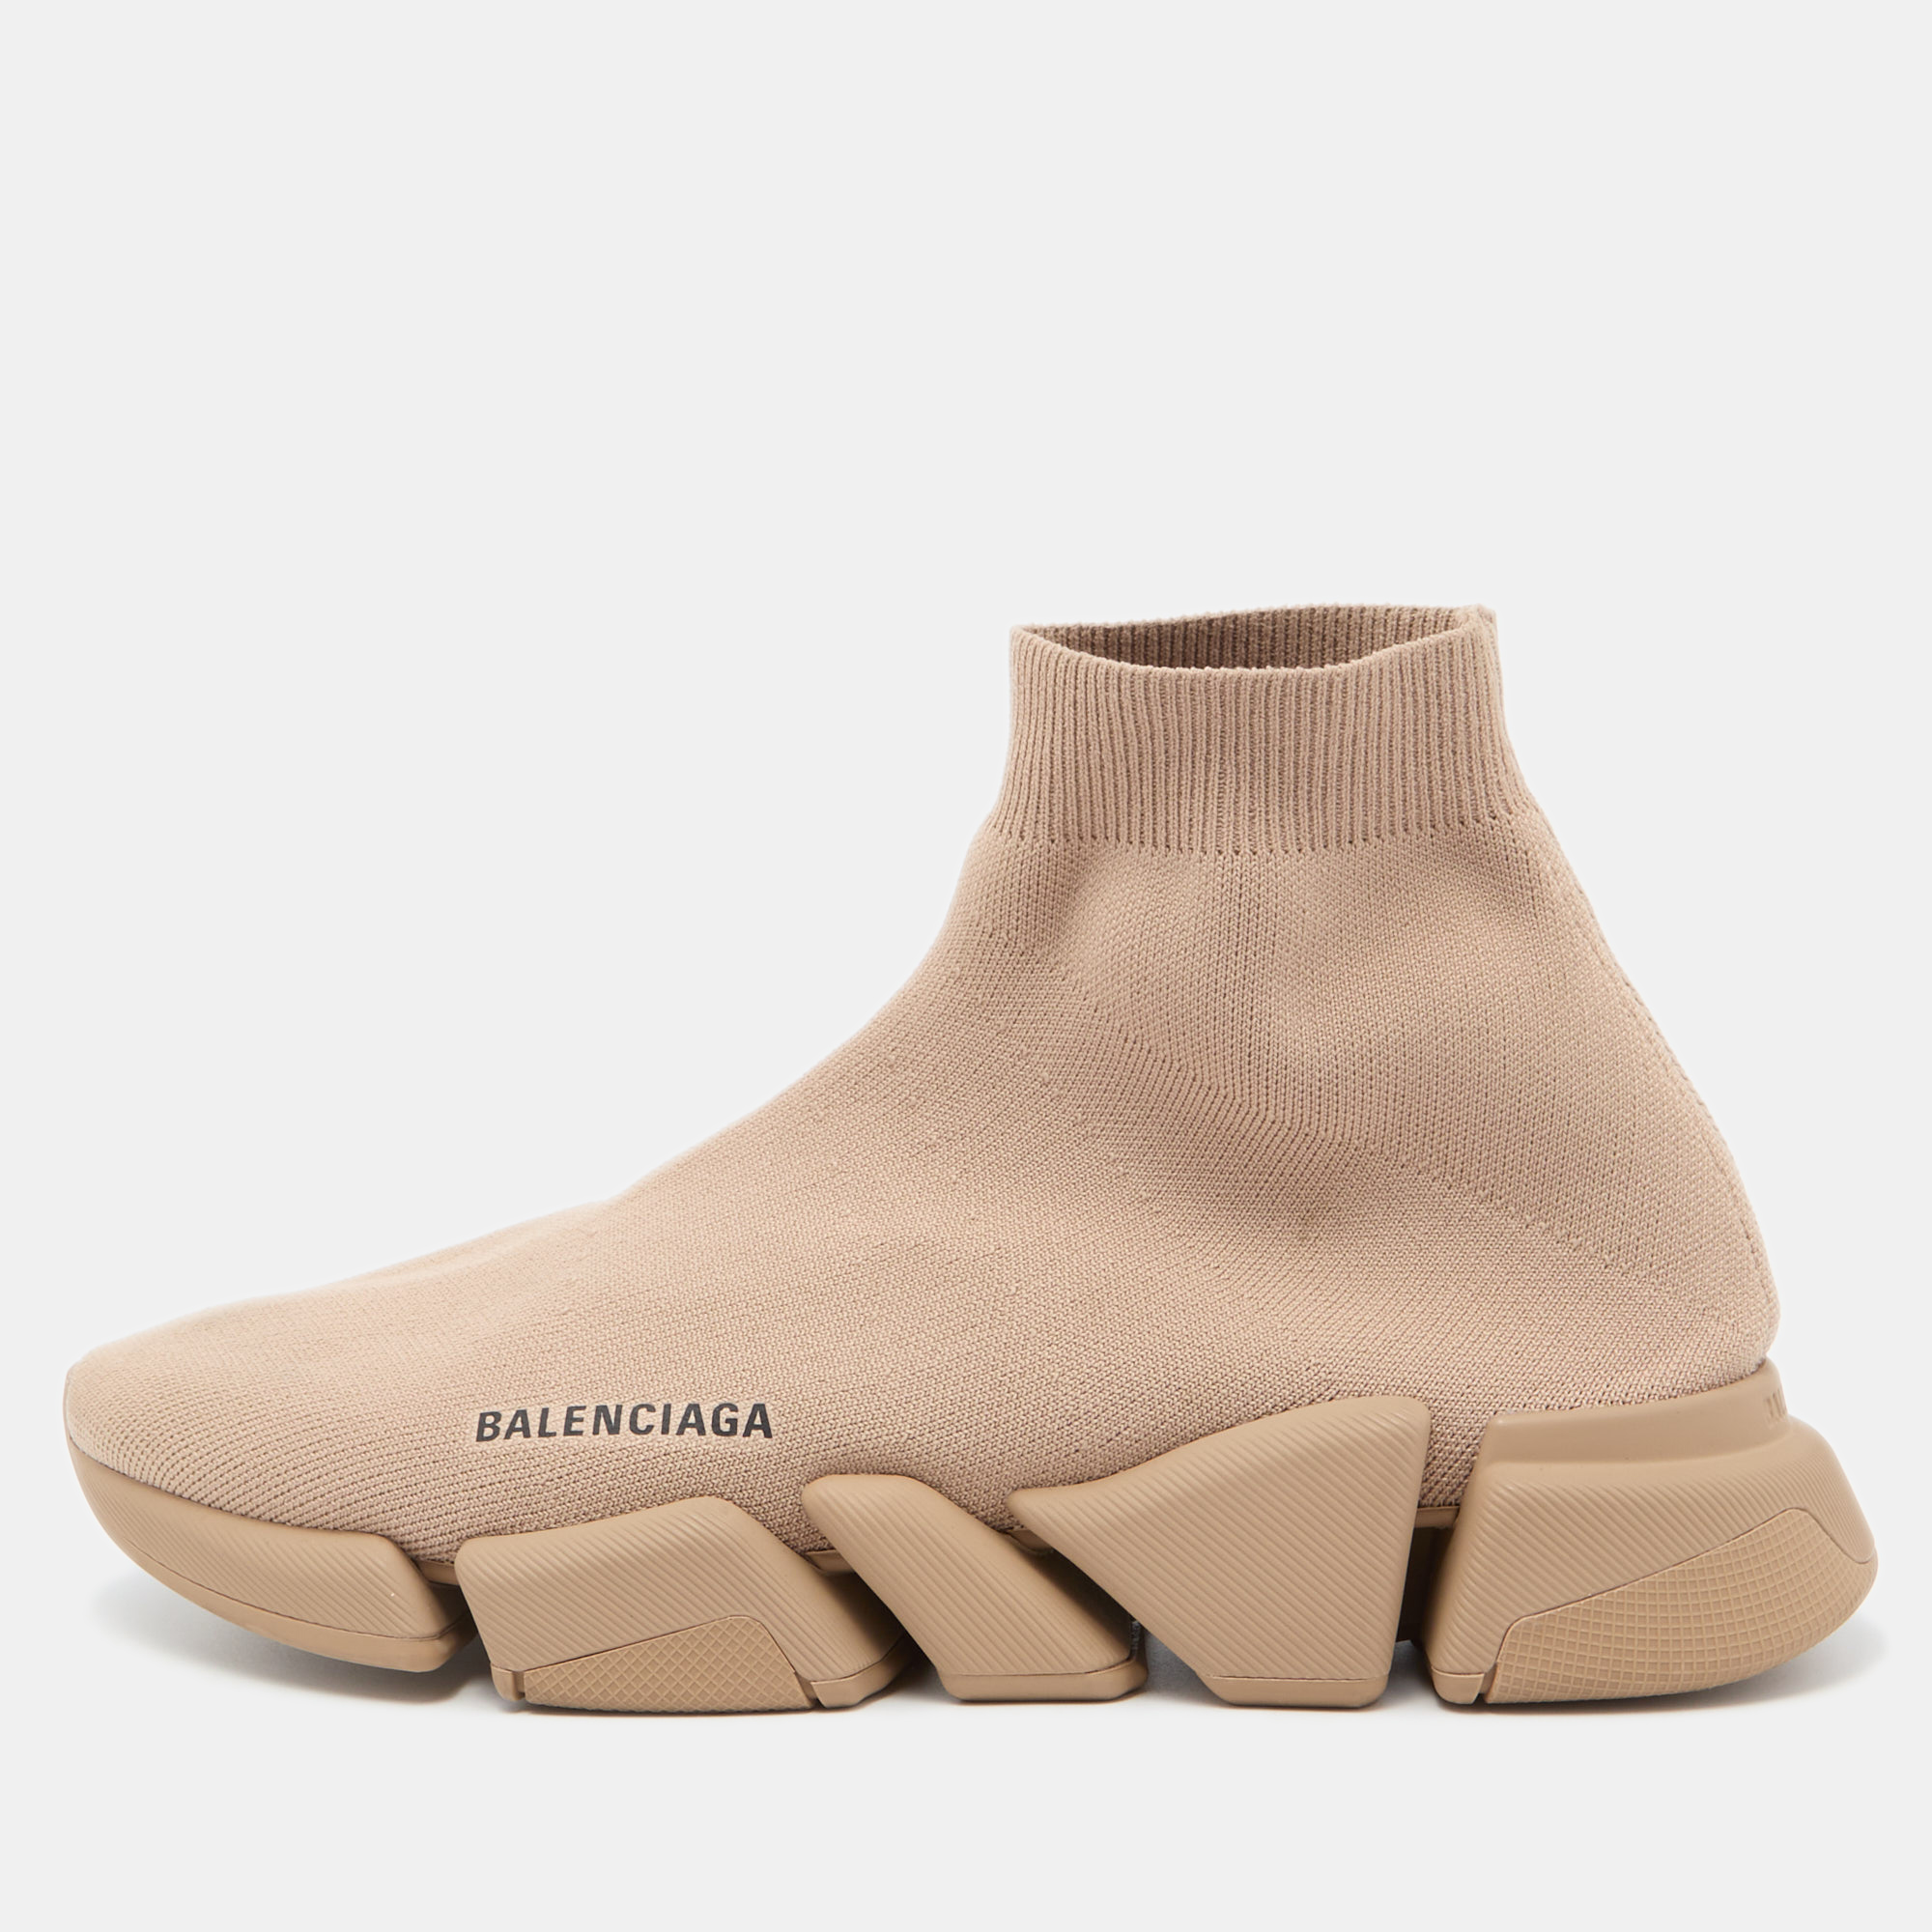 Pre-owned Balenciaga Beige Knit Fabric Speed Trainer Slip On Sneakers Size 43